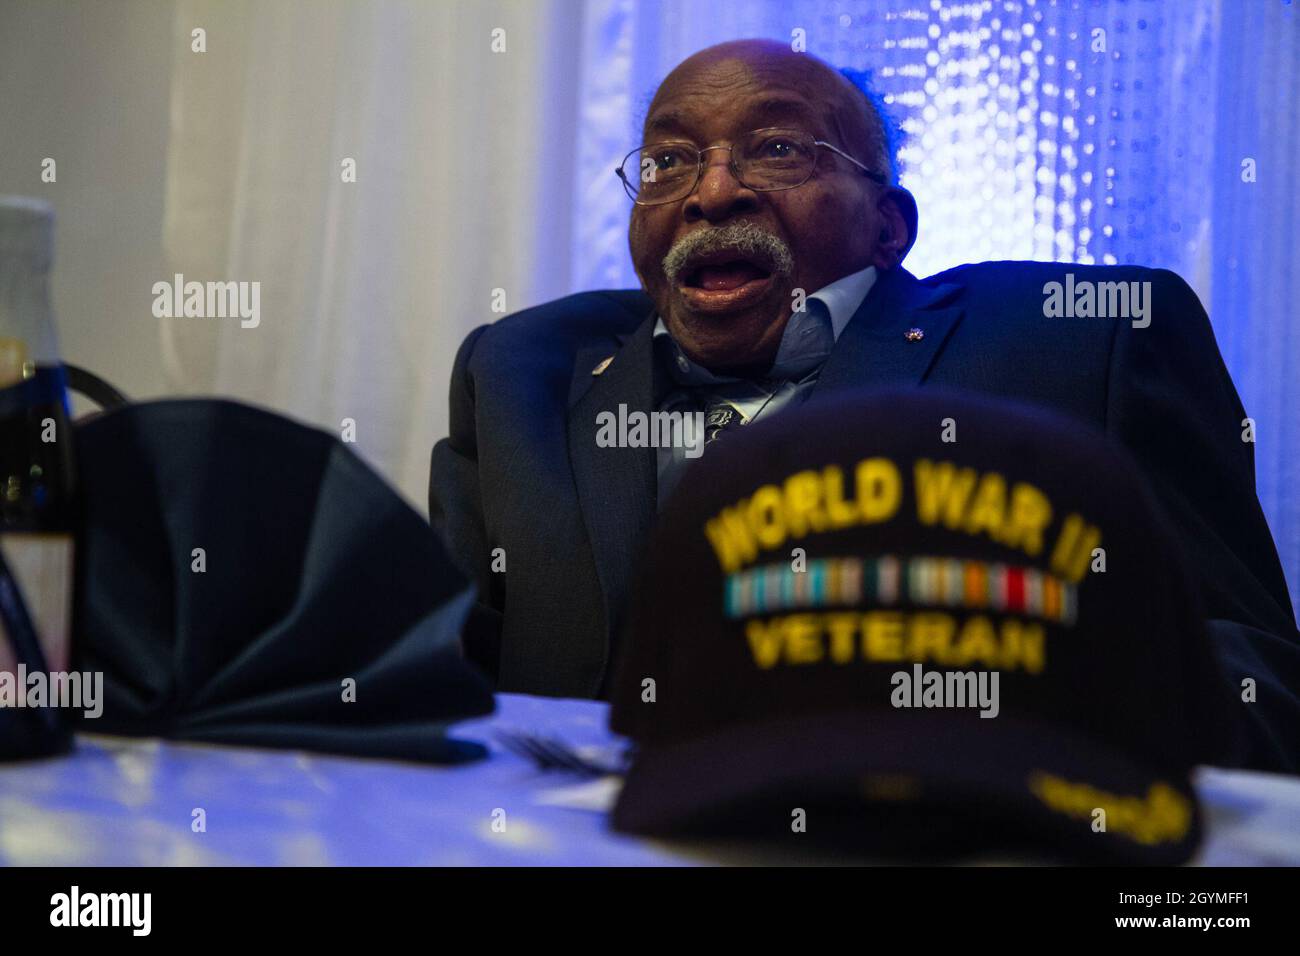 Pvt. Roosevelt Ruffin, a former Army Soldier who served with Company C, 614th Tank Destroyer Battalion, during World War II, interacts with guests at his 100th birthday celebration Feb. 1, 2020, in Virginia Beach, Virginia. Ruffin was one of the very first African-American tank destroyer unit members of the war. (U.S. Army Reserve photo by Sgt. 1st Class Javier Orona) Stock Photo